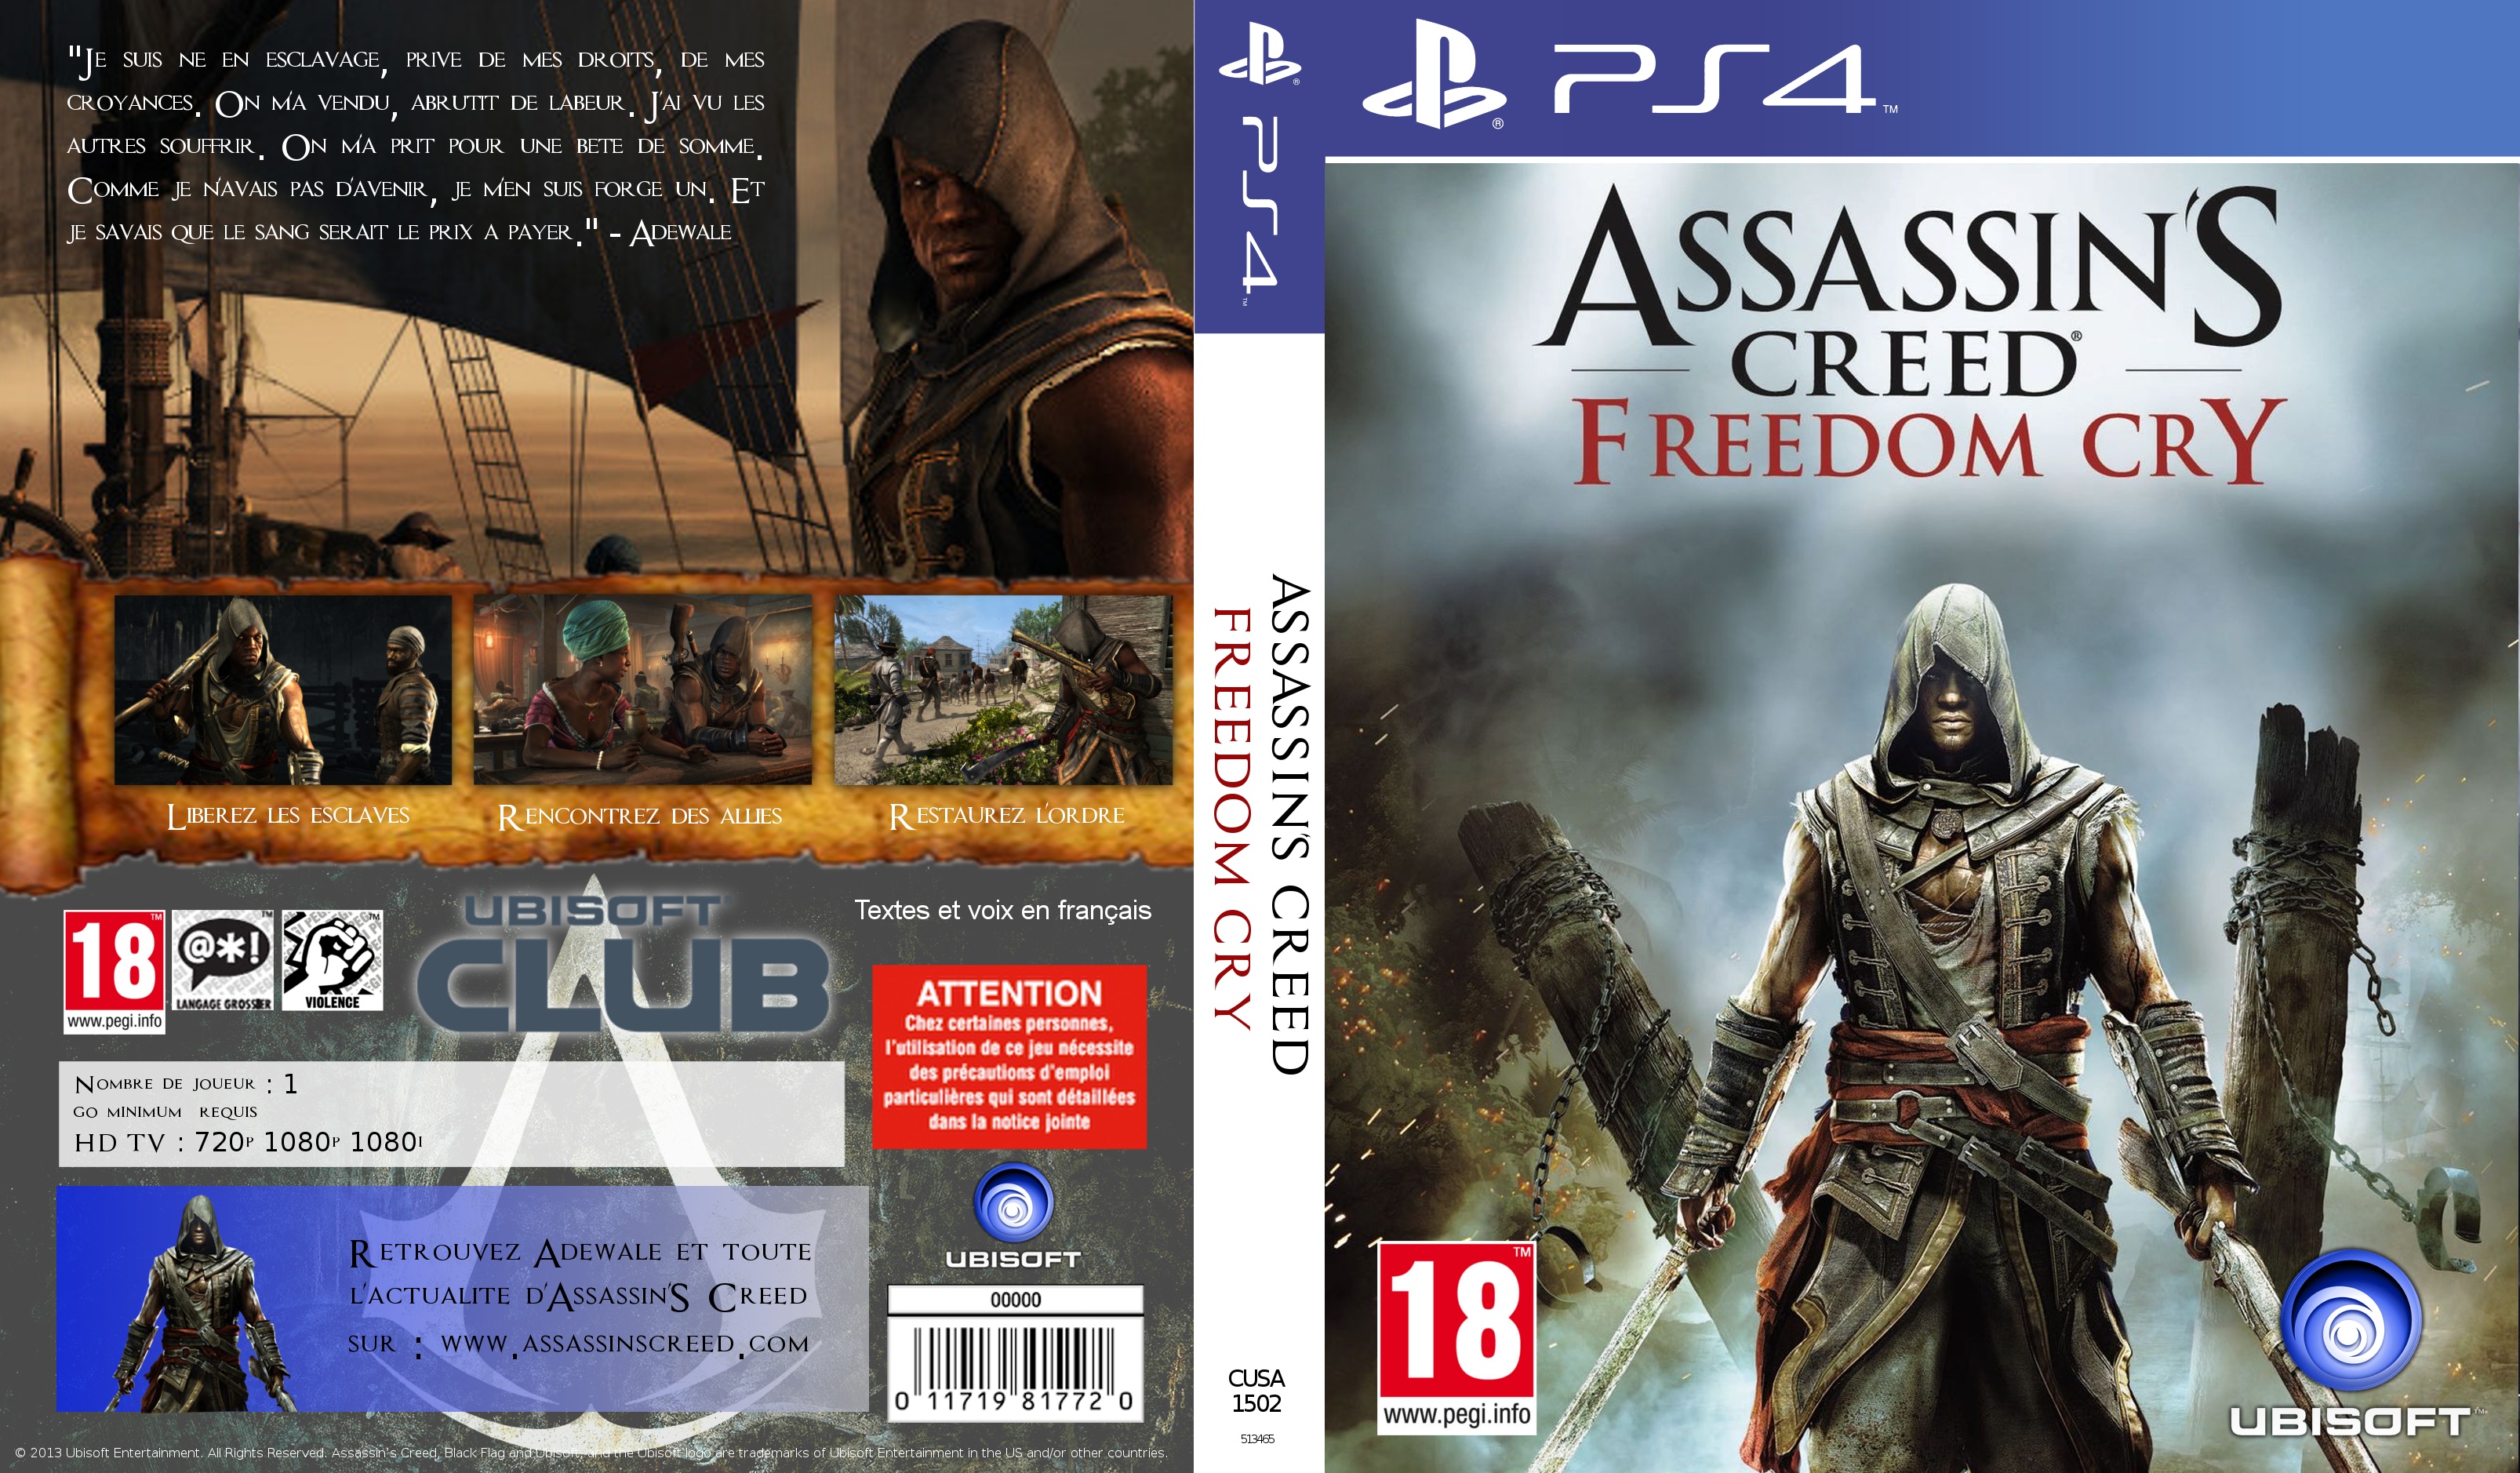 Assassin's Creed Freedom Cry box cover